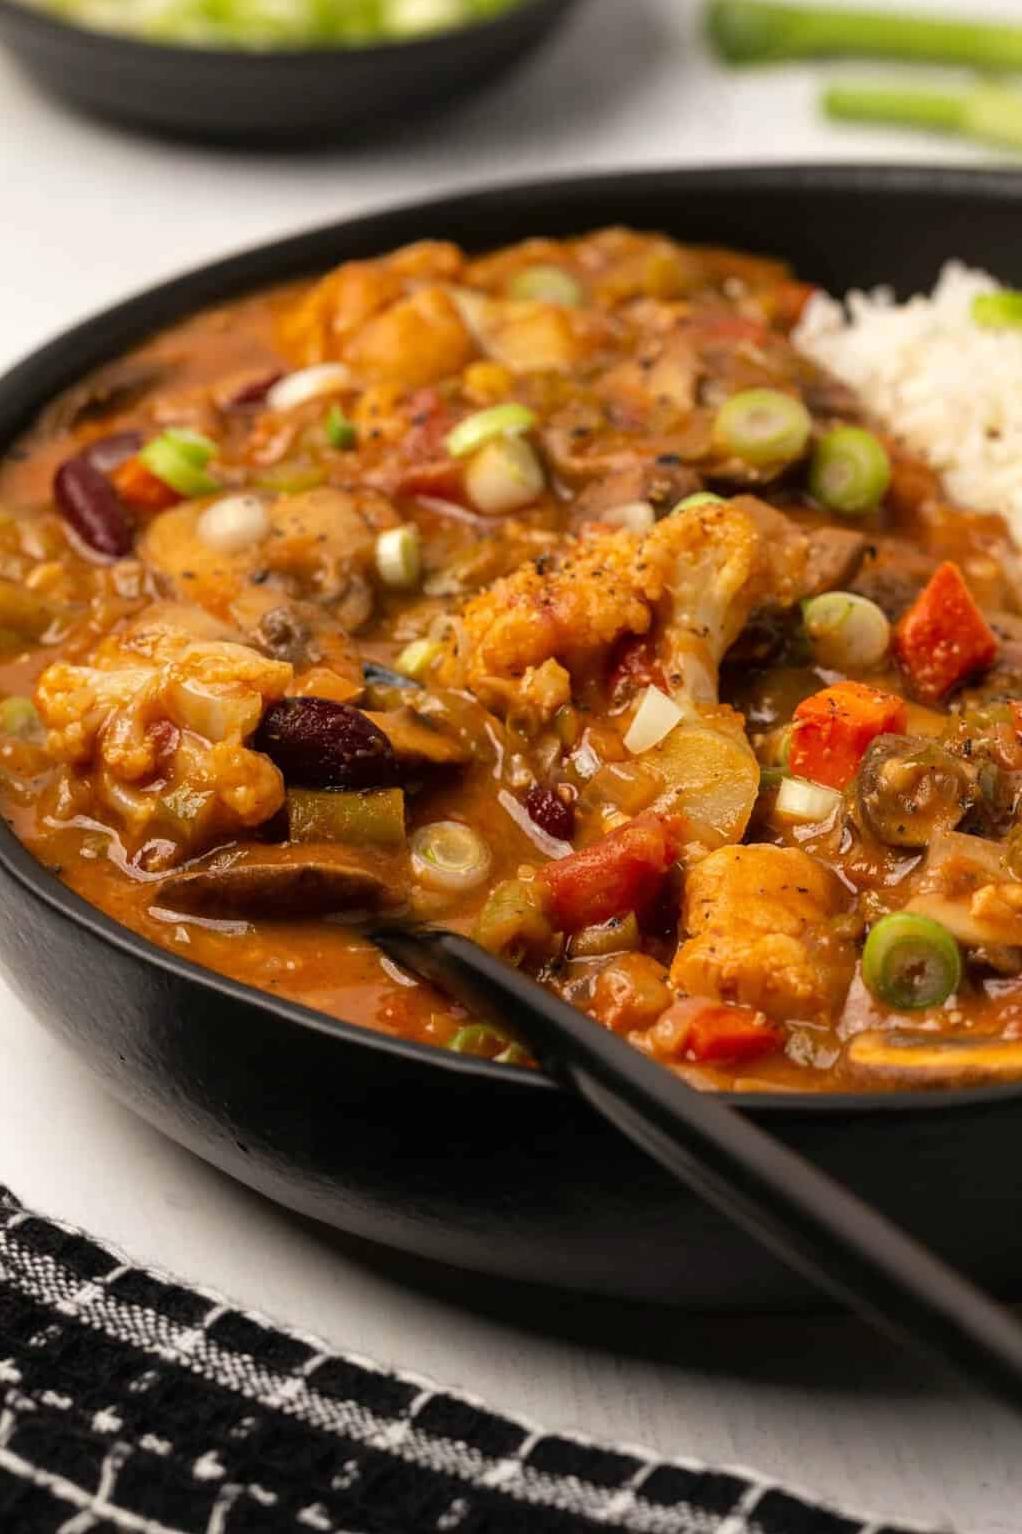  This vegetarian gumbo recipe delivers the perfect balance of flavor, texture and aroma.